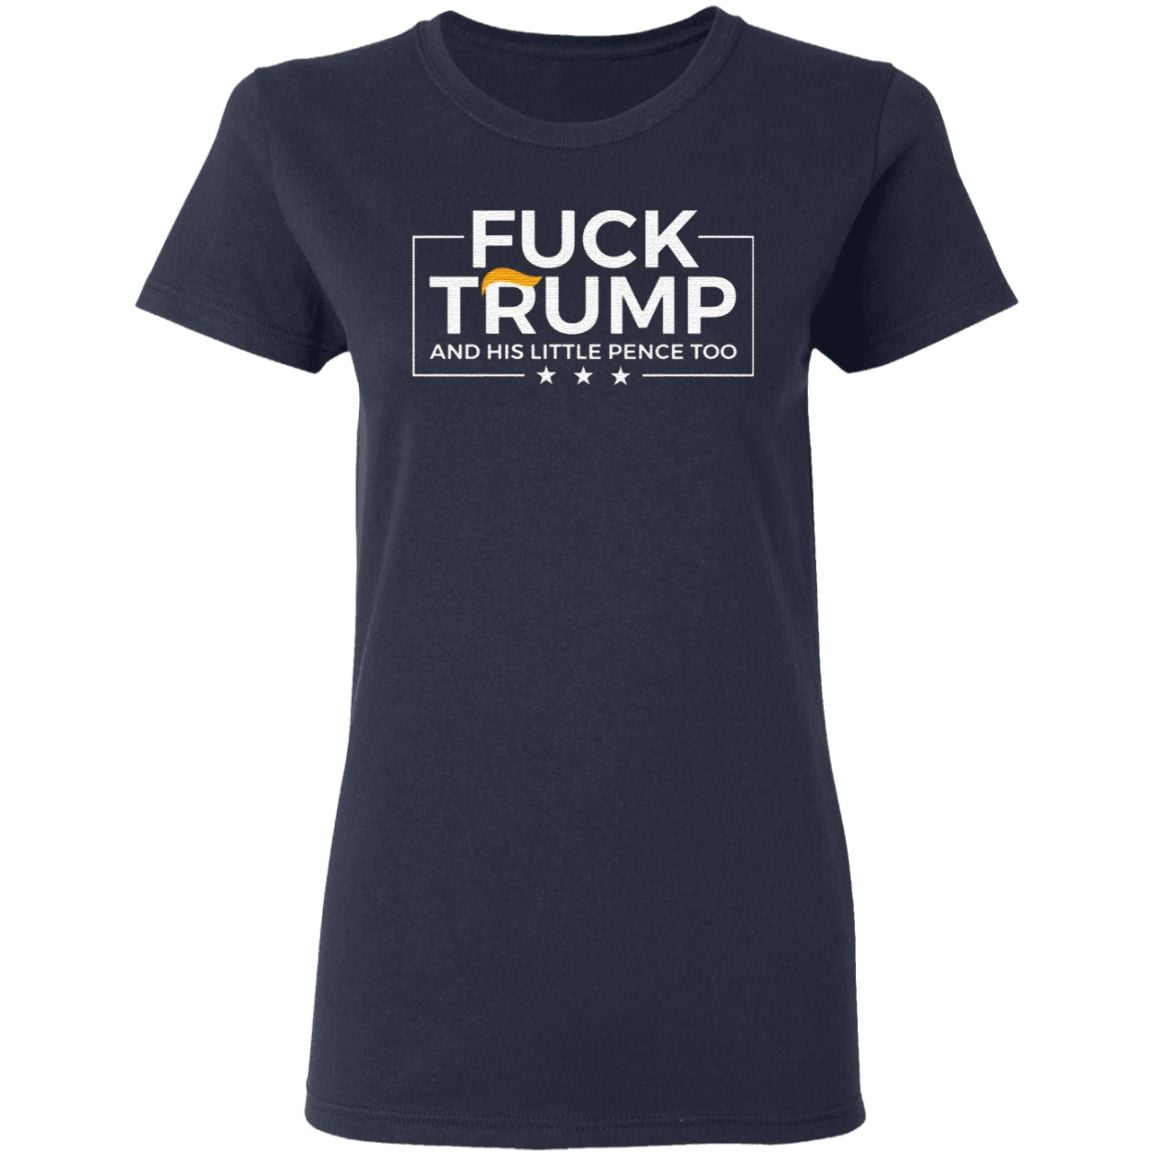 Fuck Trump And His Little Pence Too Funny Anti Republican T-Shirt